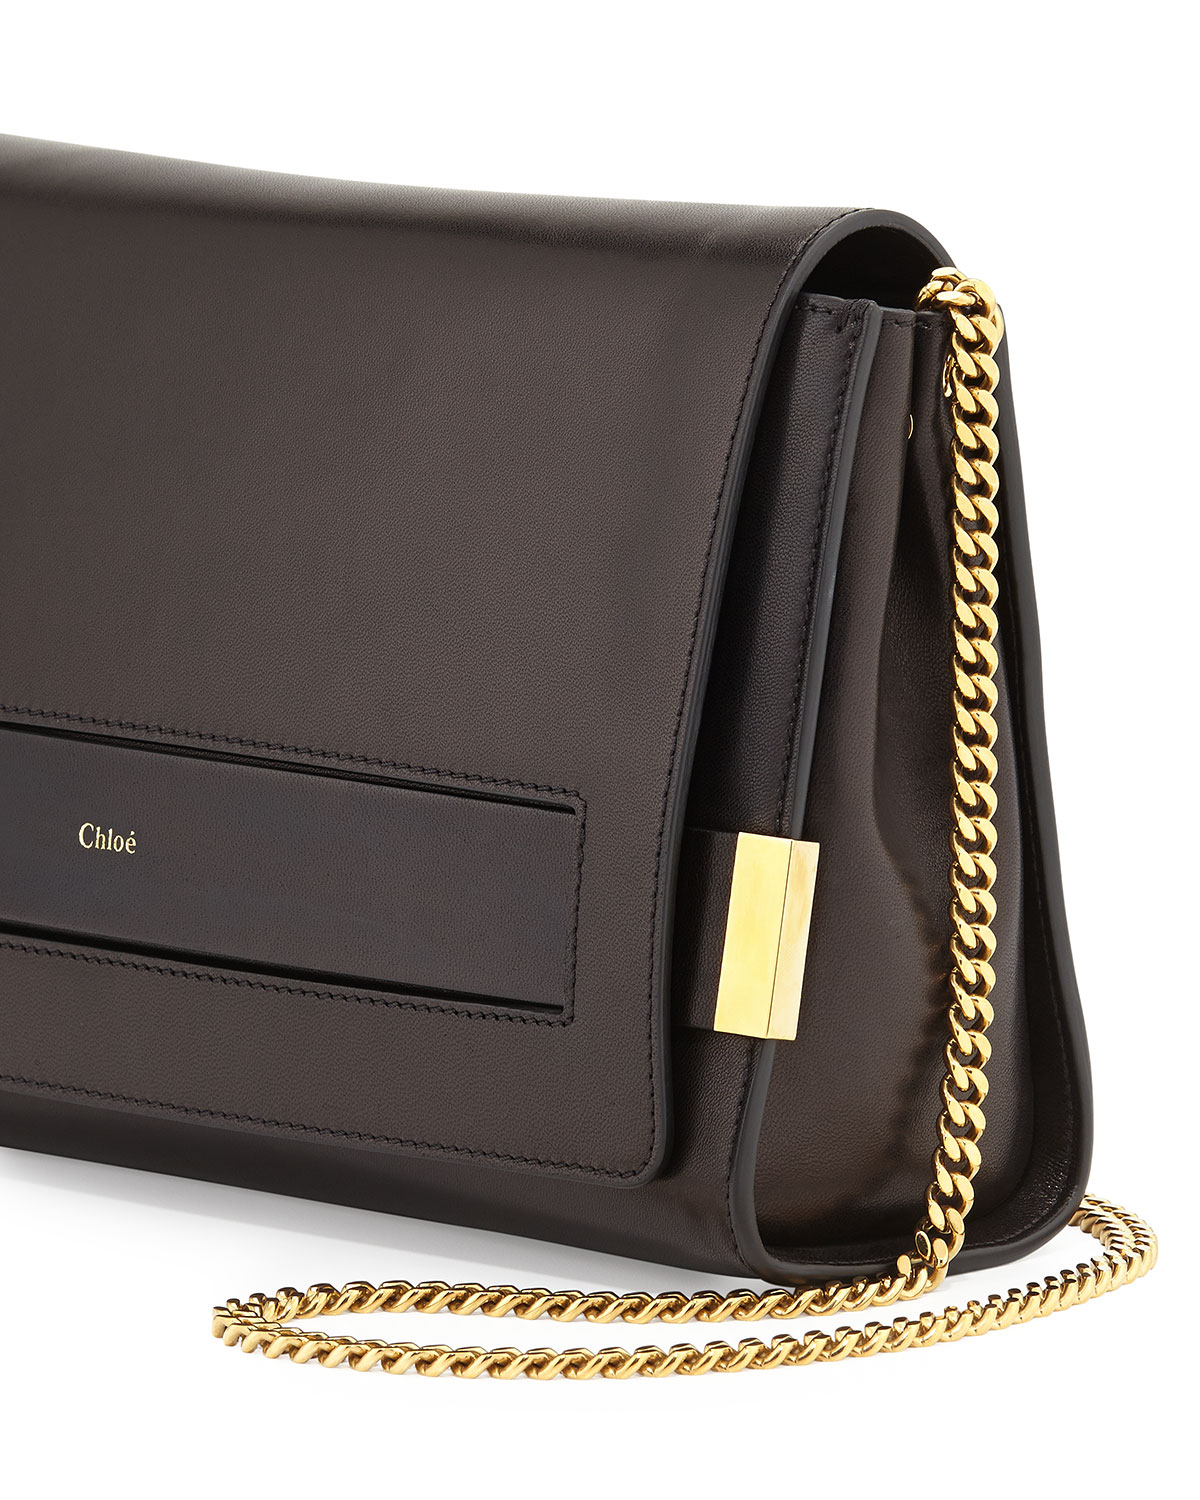 Chloé Elle Large Clutch Bag With Chain Strap in Black | Lyst